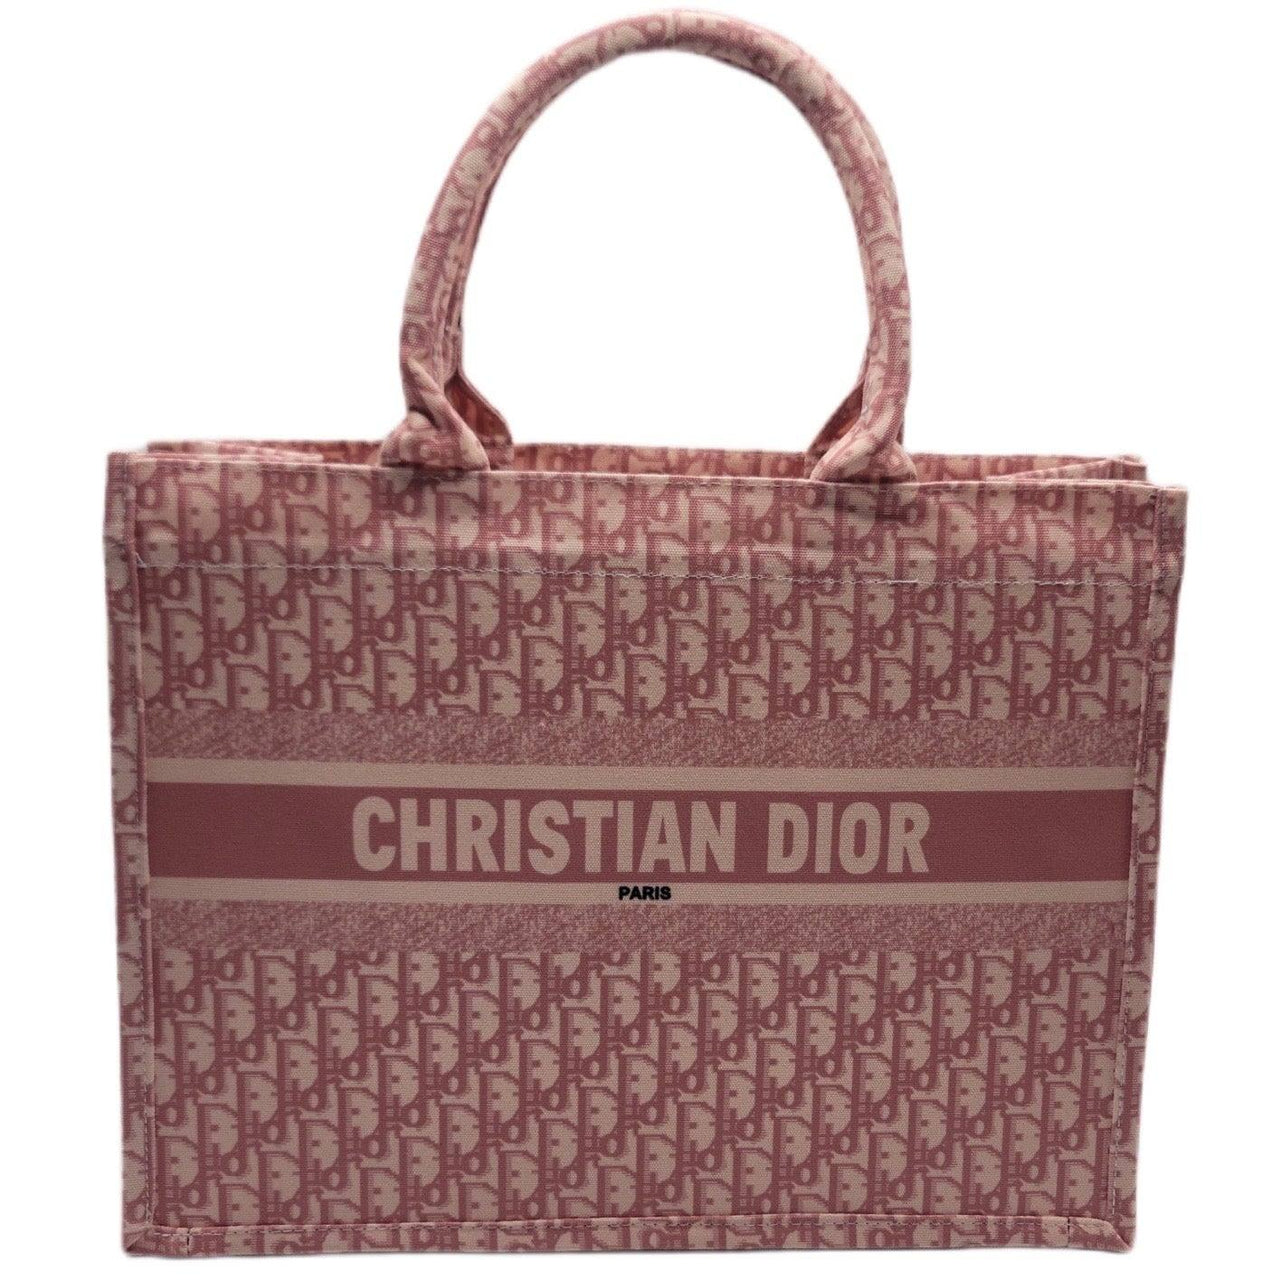 The Bag Couture Handbags, Wallets & Cases Christian Dior Book Tote Bag Pink